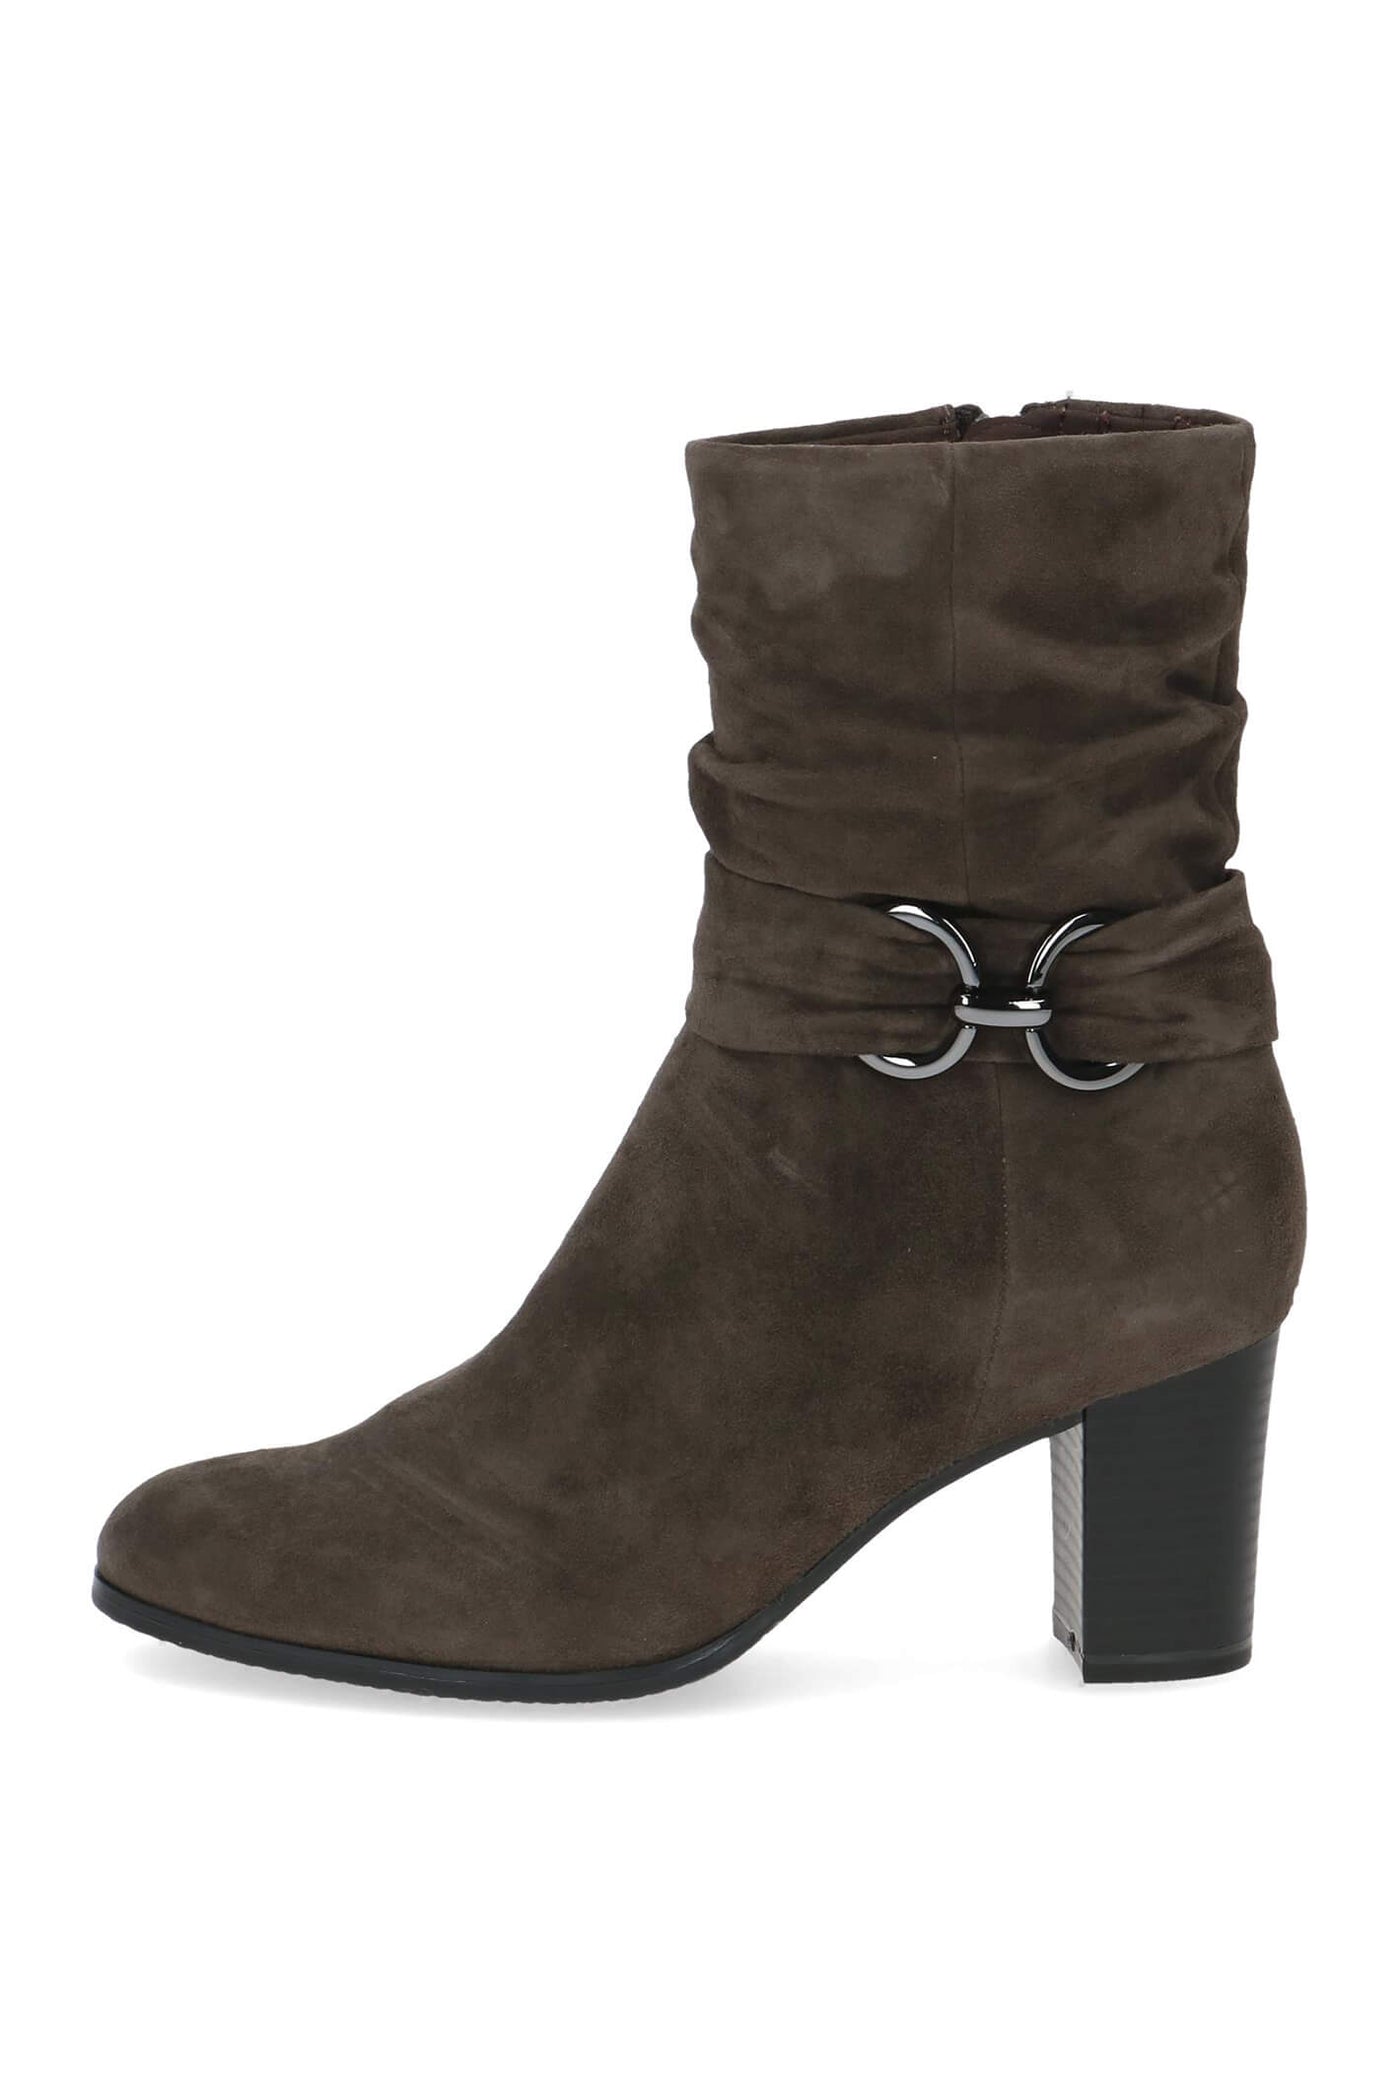 Caprice Verdana 9-25328-41-225 Stone Brown Suede Boots - Rouge Boutique